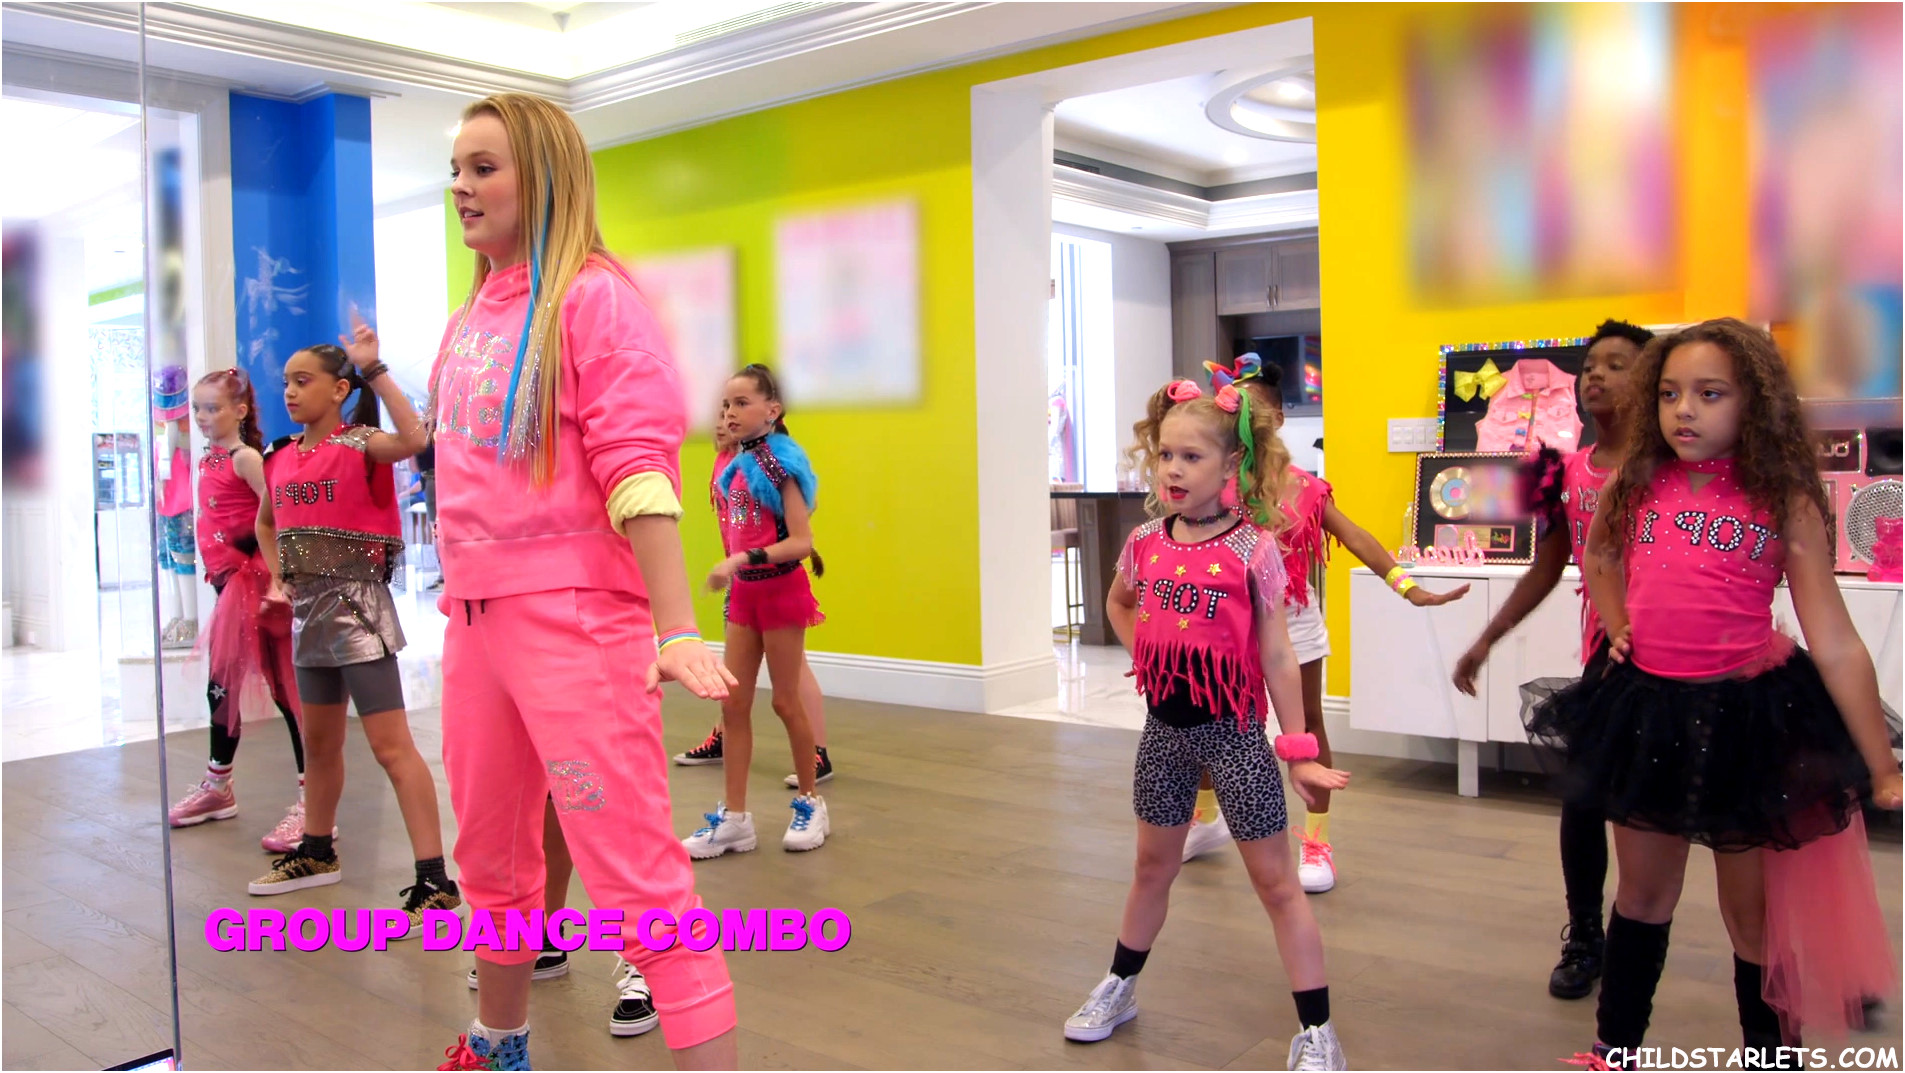 Kinley Cunningham / Dallas Skye / Others
"Siwas Dance Pop Revolution" - 2022/HD
Episode 2: Second Dance, Second Chance